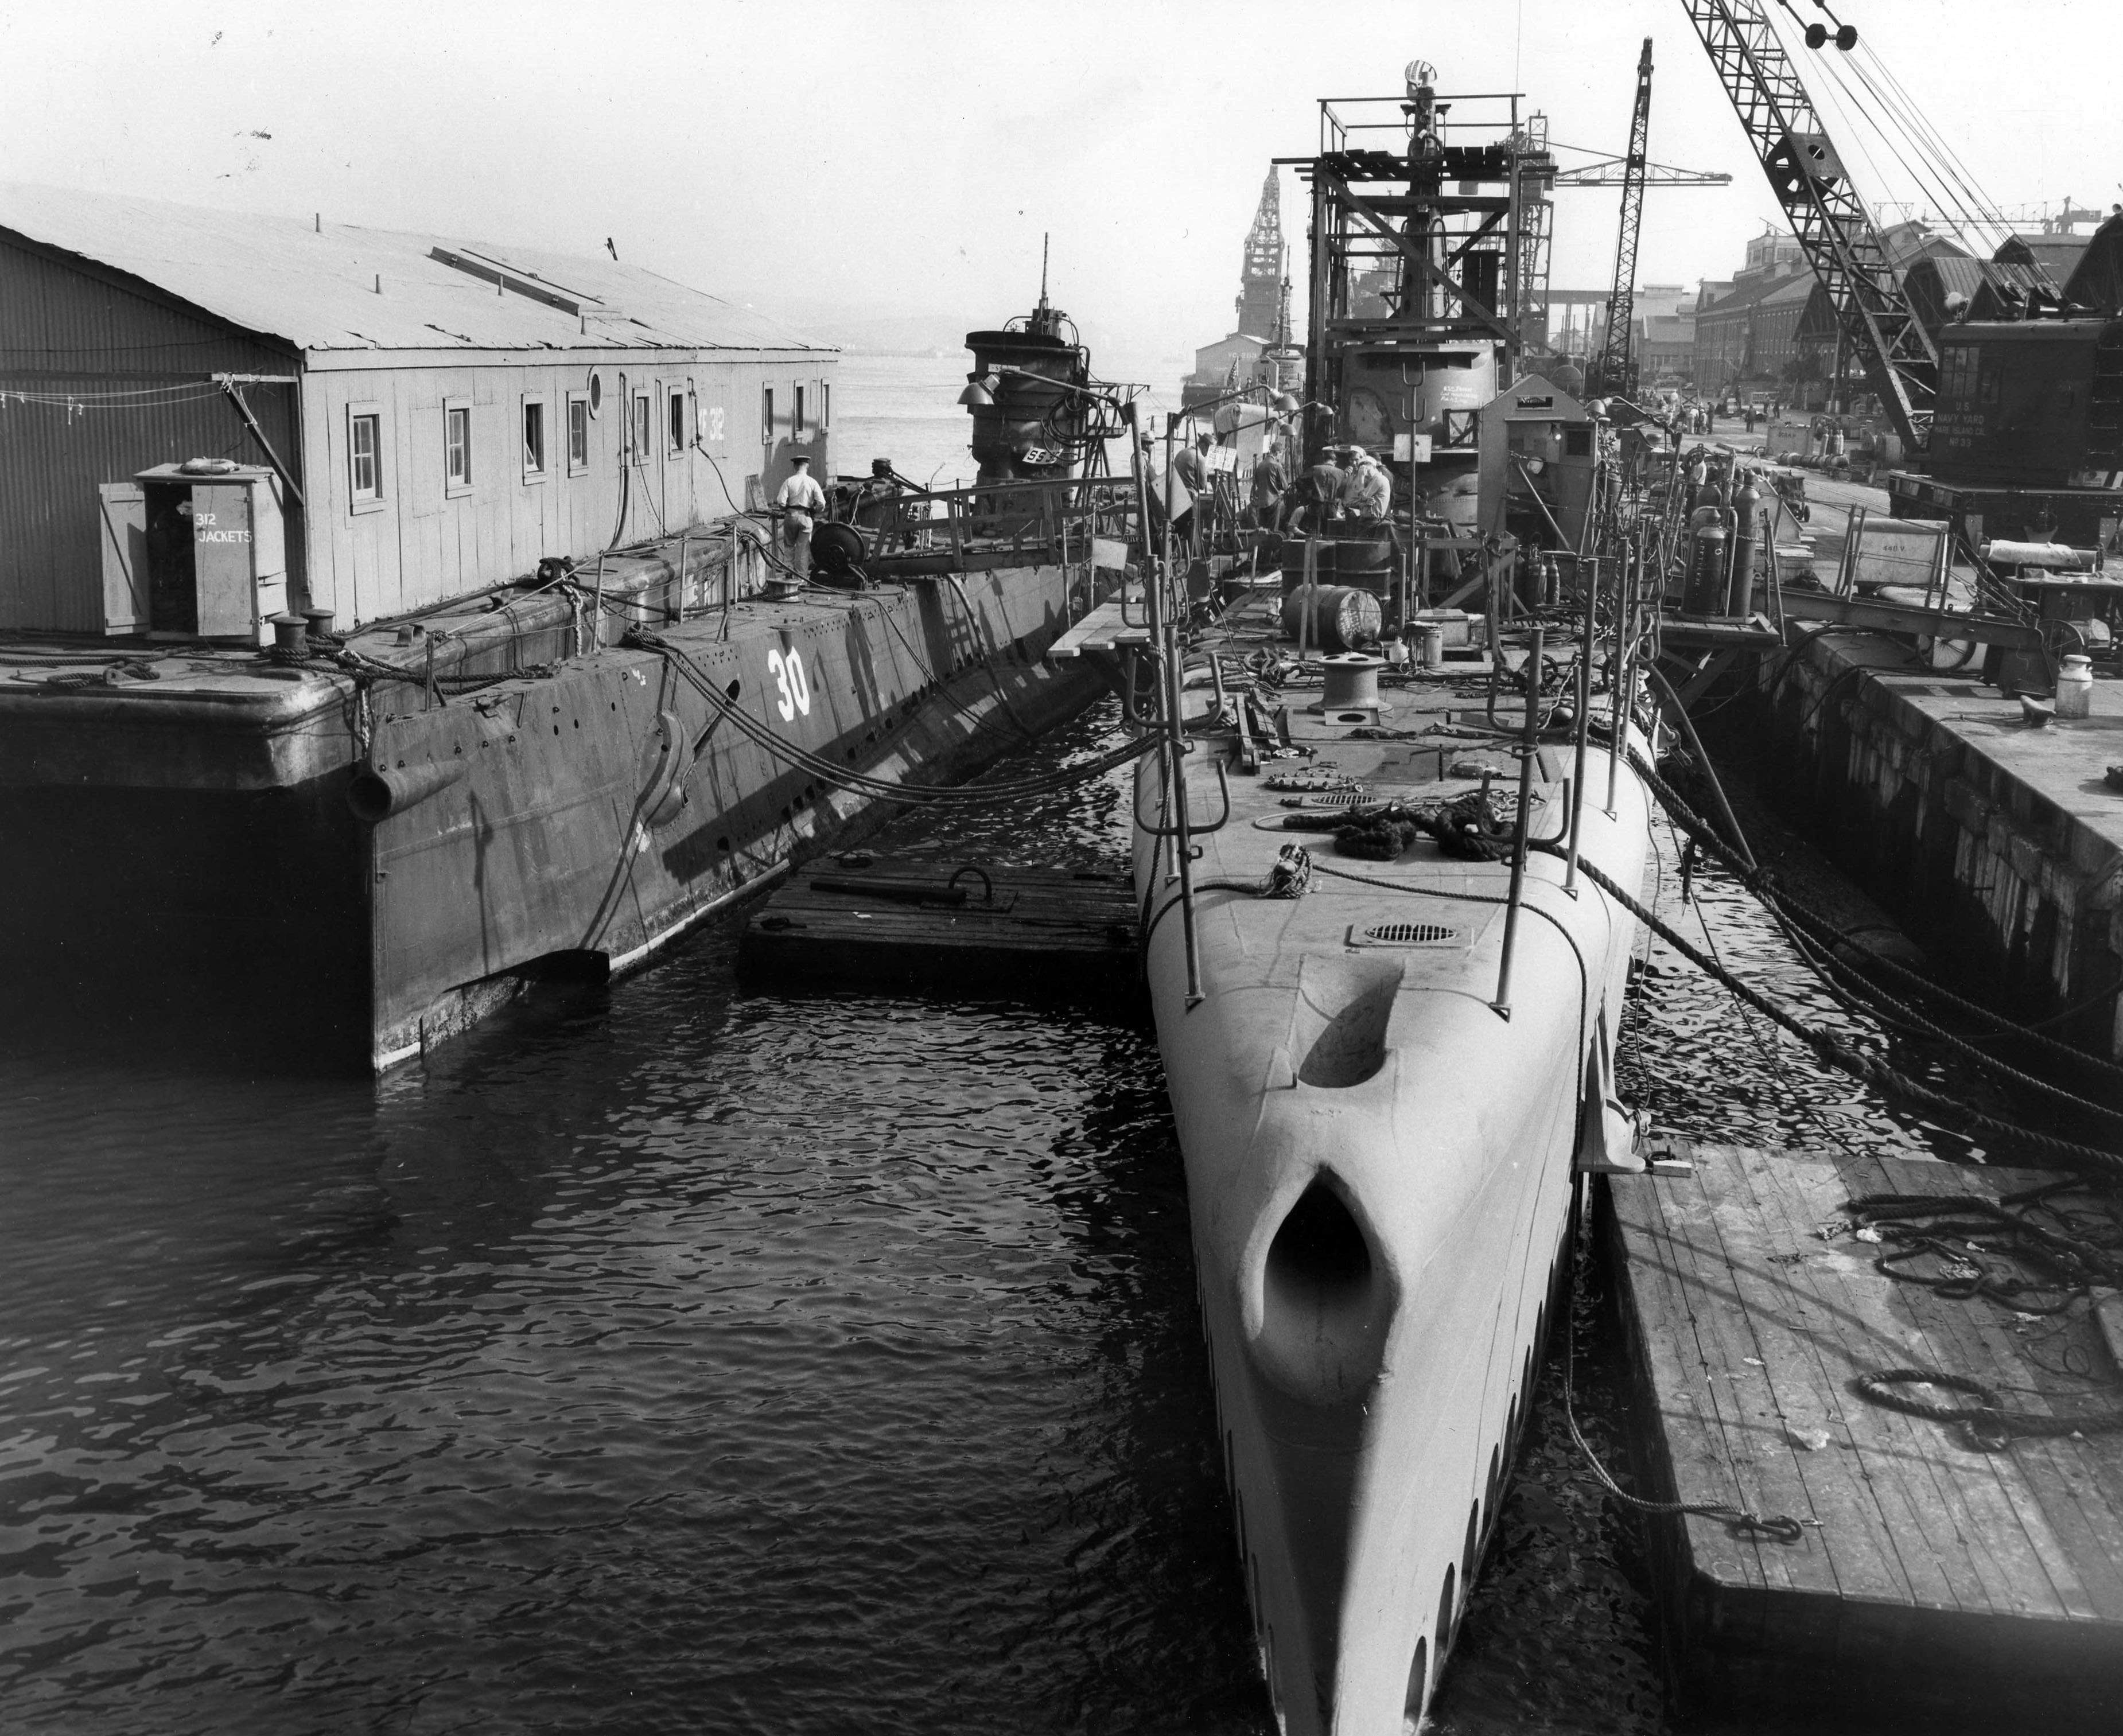 USS Parche and another submarine at Mare Island Naval Shipyard, Vallejo, California, United States, 19-23 Oct 1945